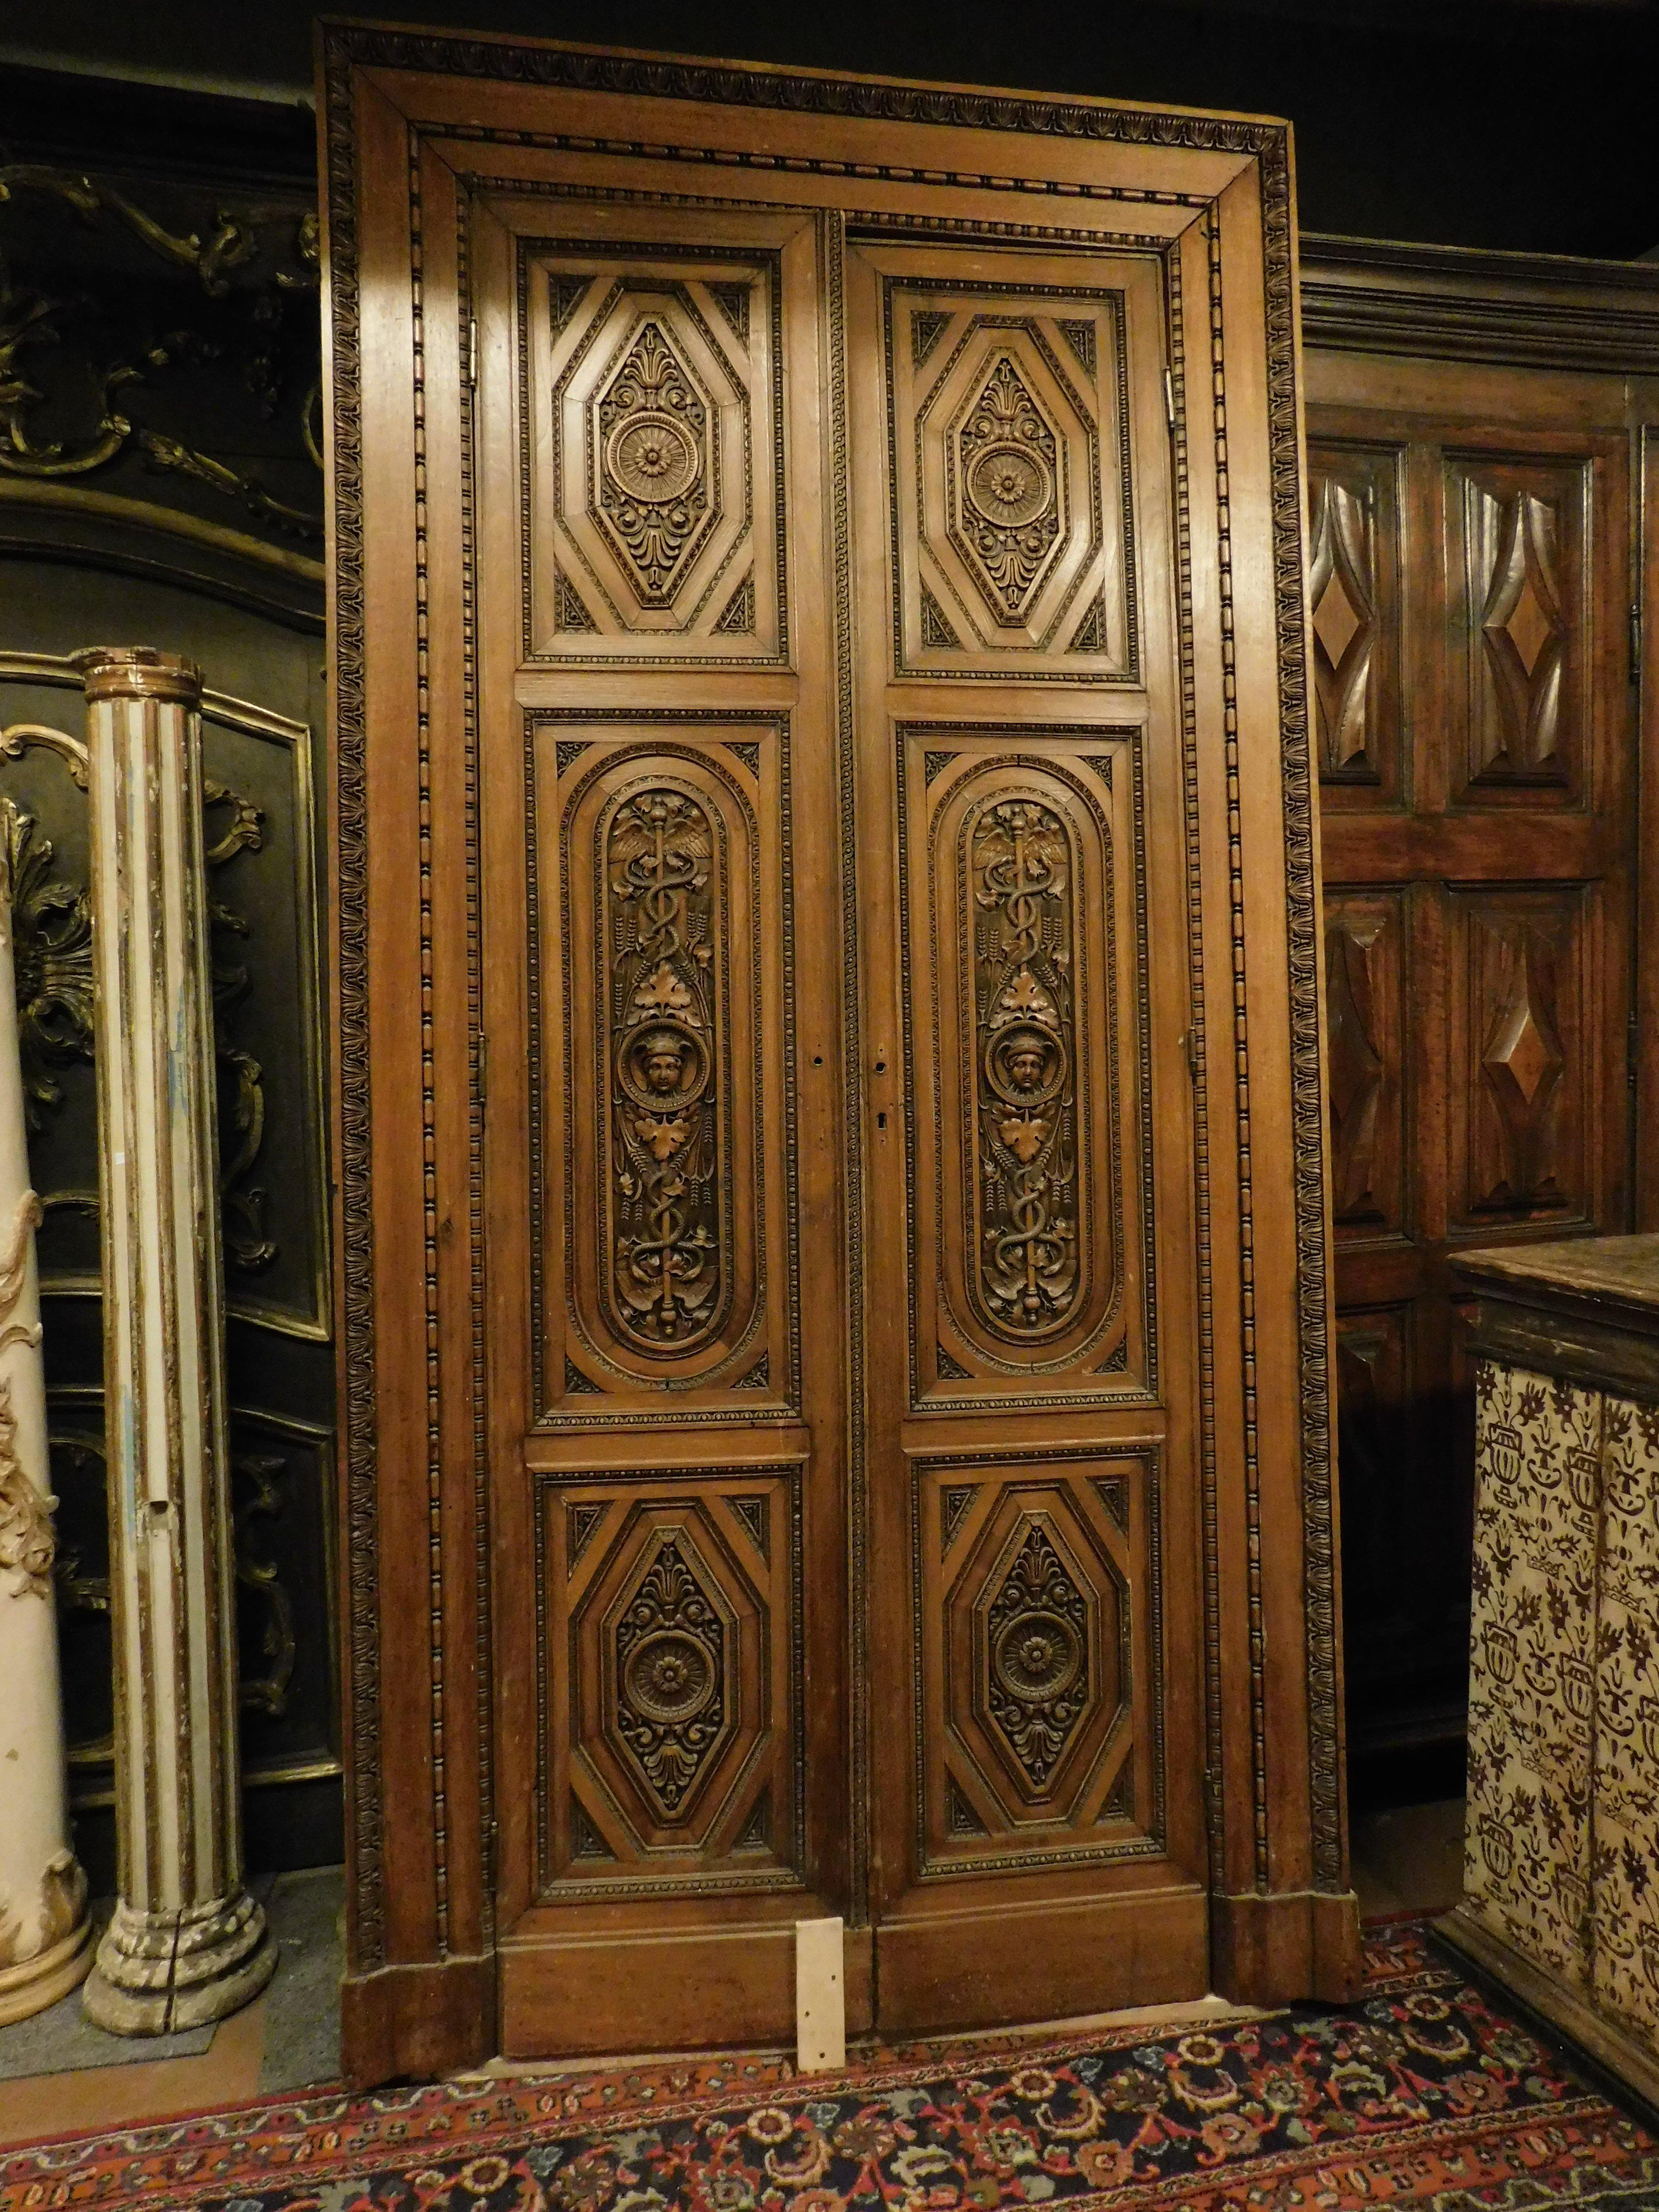 Ancient entrance door, main door richly carved by hand in precious and solid walnut wood, built for an ancient pharmacy or a doctor's office, as it has symbols of medicine such as the aesculapius. Built in the early 19th century in Italy for an